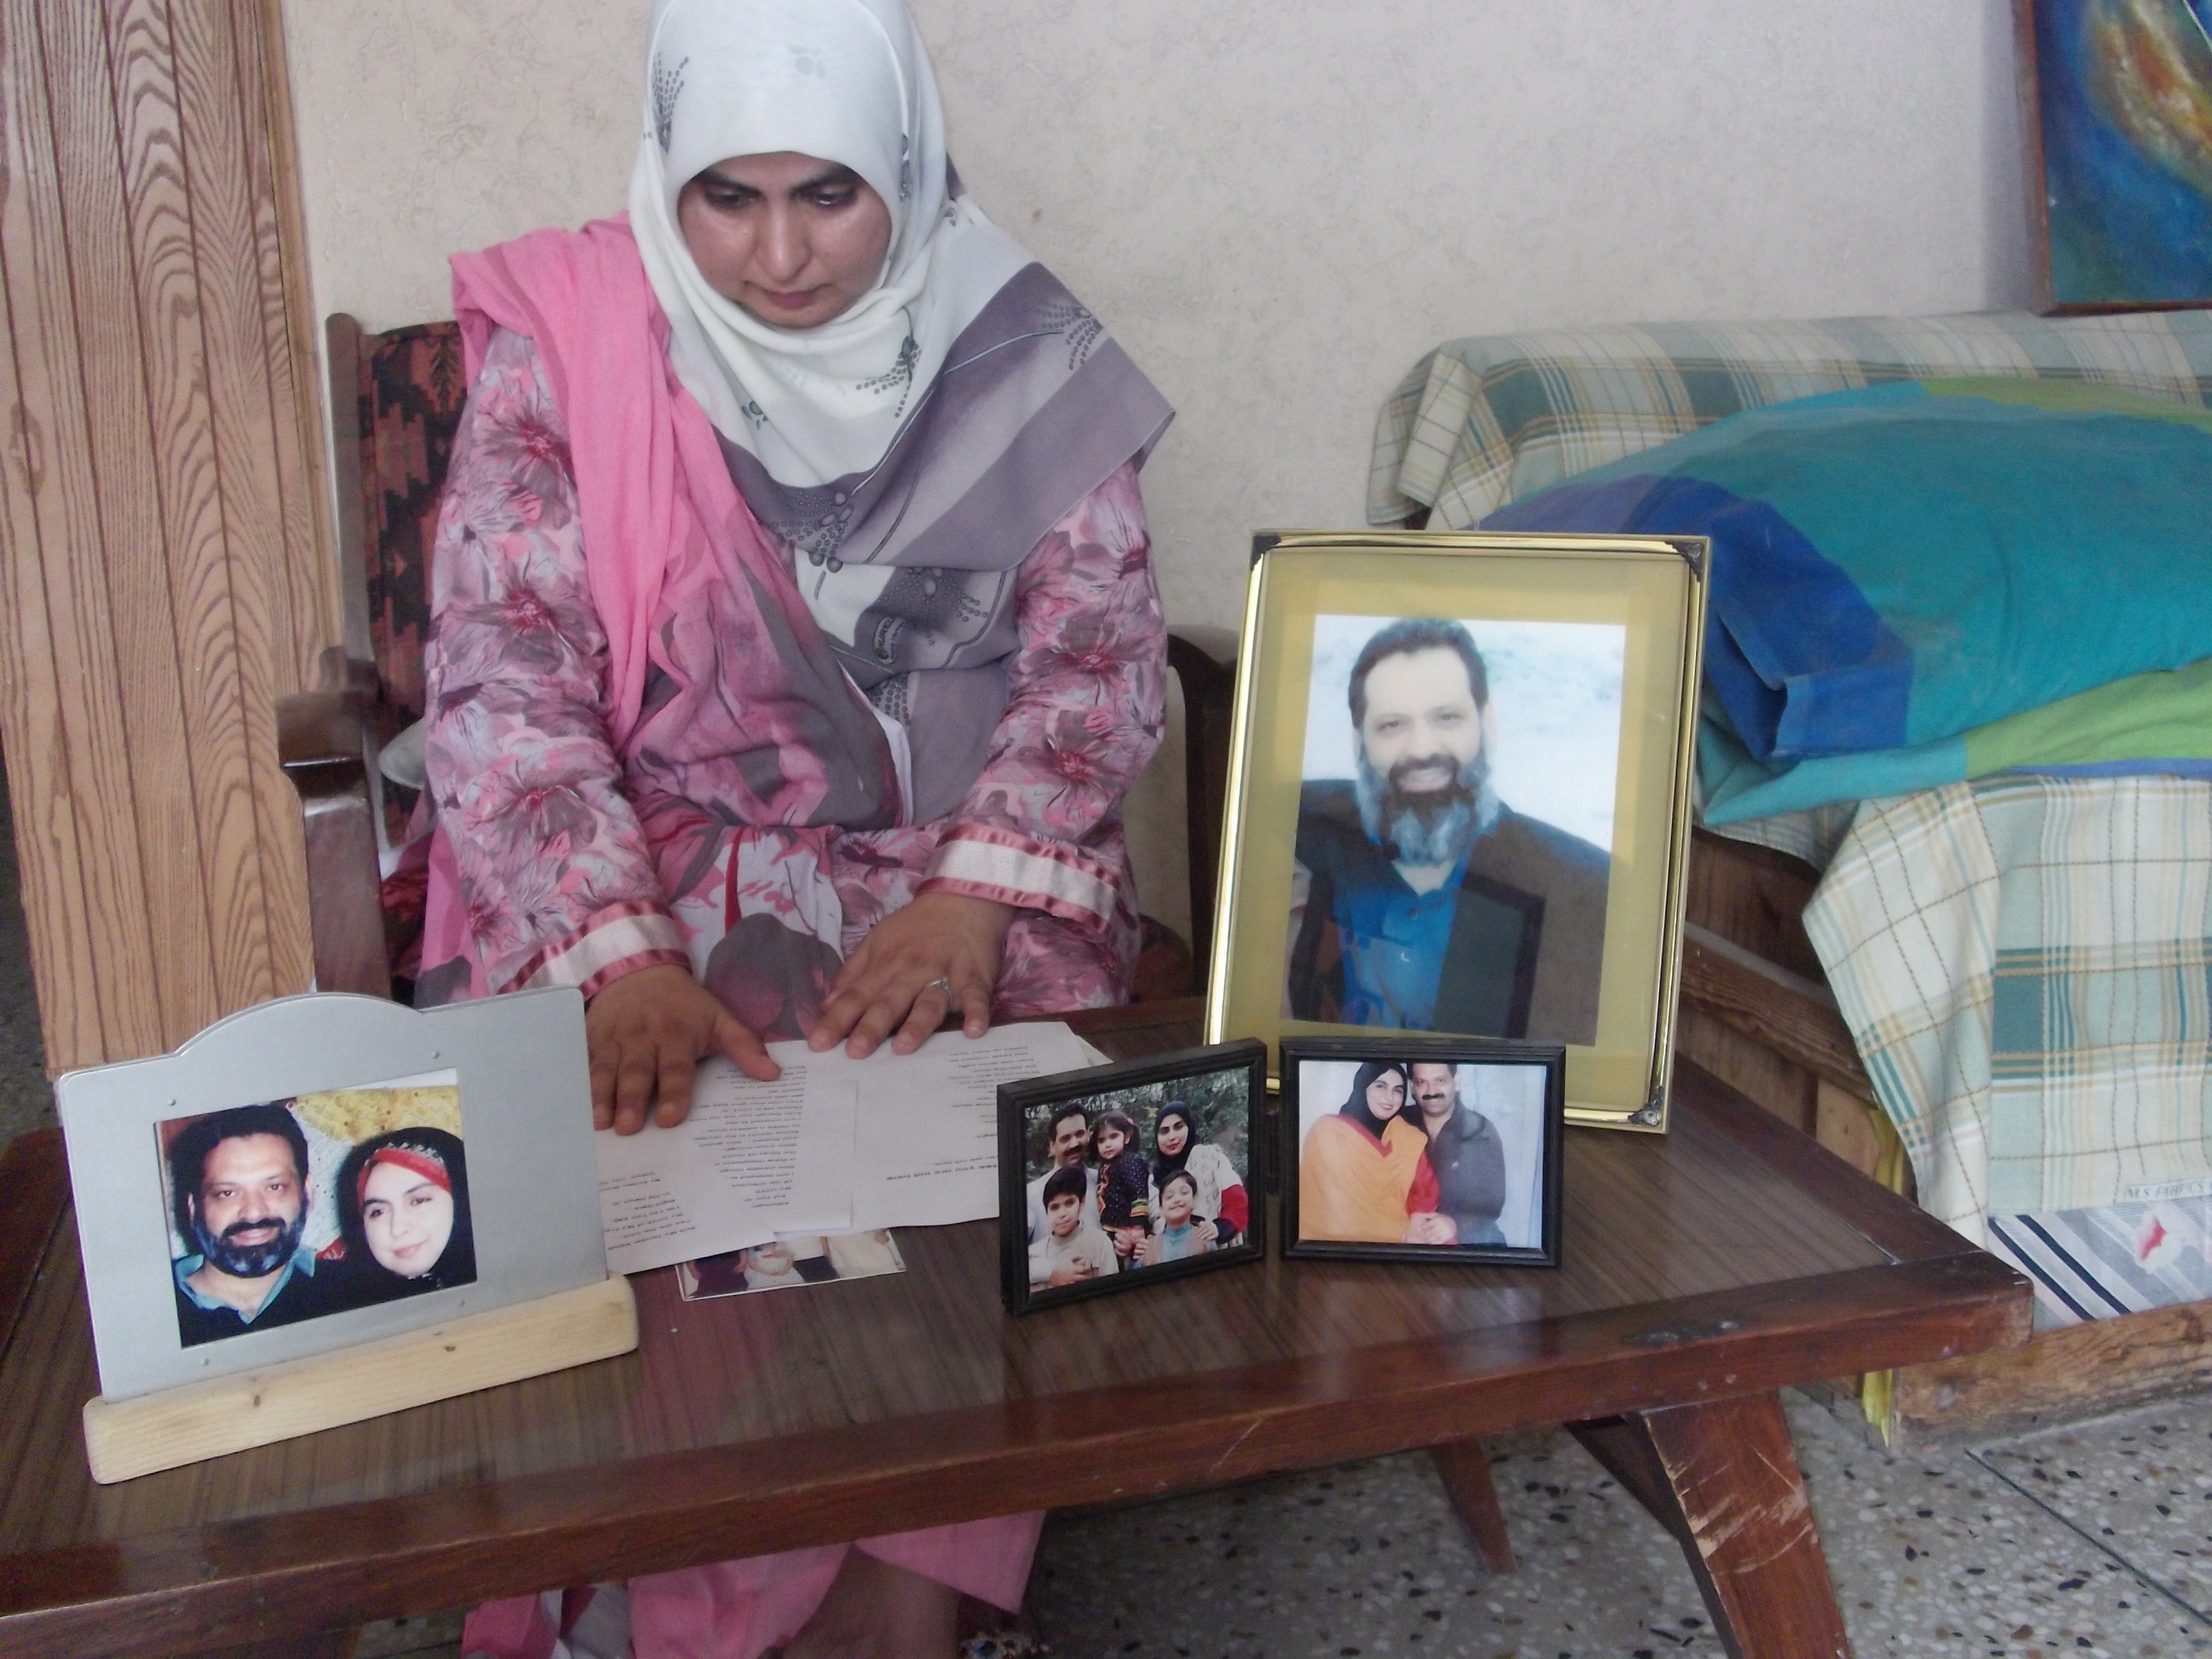 Amina Masood Janjua with photos of her husband, Masood Ahemd Janjua, a businessman from Rawalpindi.  Masood Janjua, along with his friend Faisal Faraz, an engineer from Lahore, were  forcibly disappeared? on 30 July 2005, at some point during a two-hour bus journey from Rawalpindi to Peshawar.  Their fate and whereabouts remain unknown.